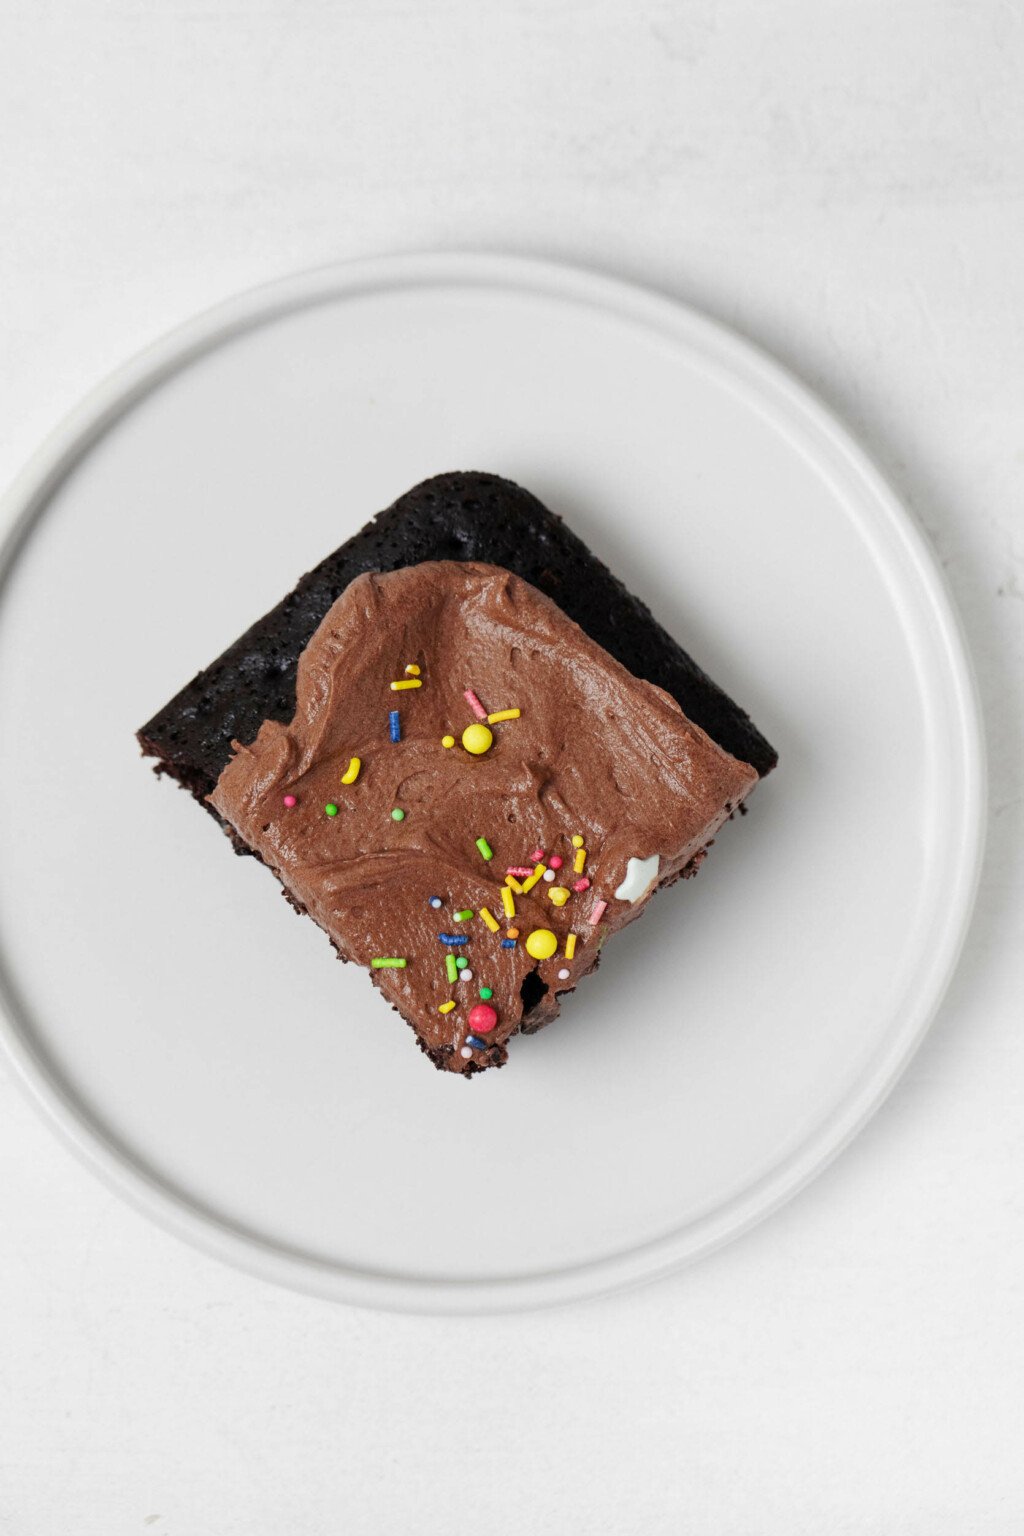 A square slice of chocolate snack cake has been served on a round, white plate.